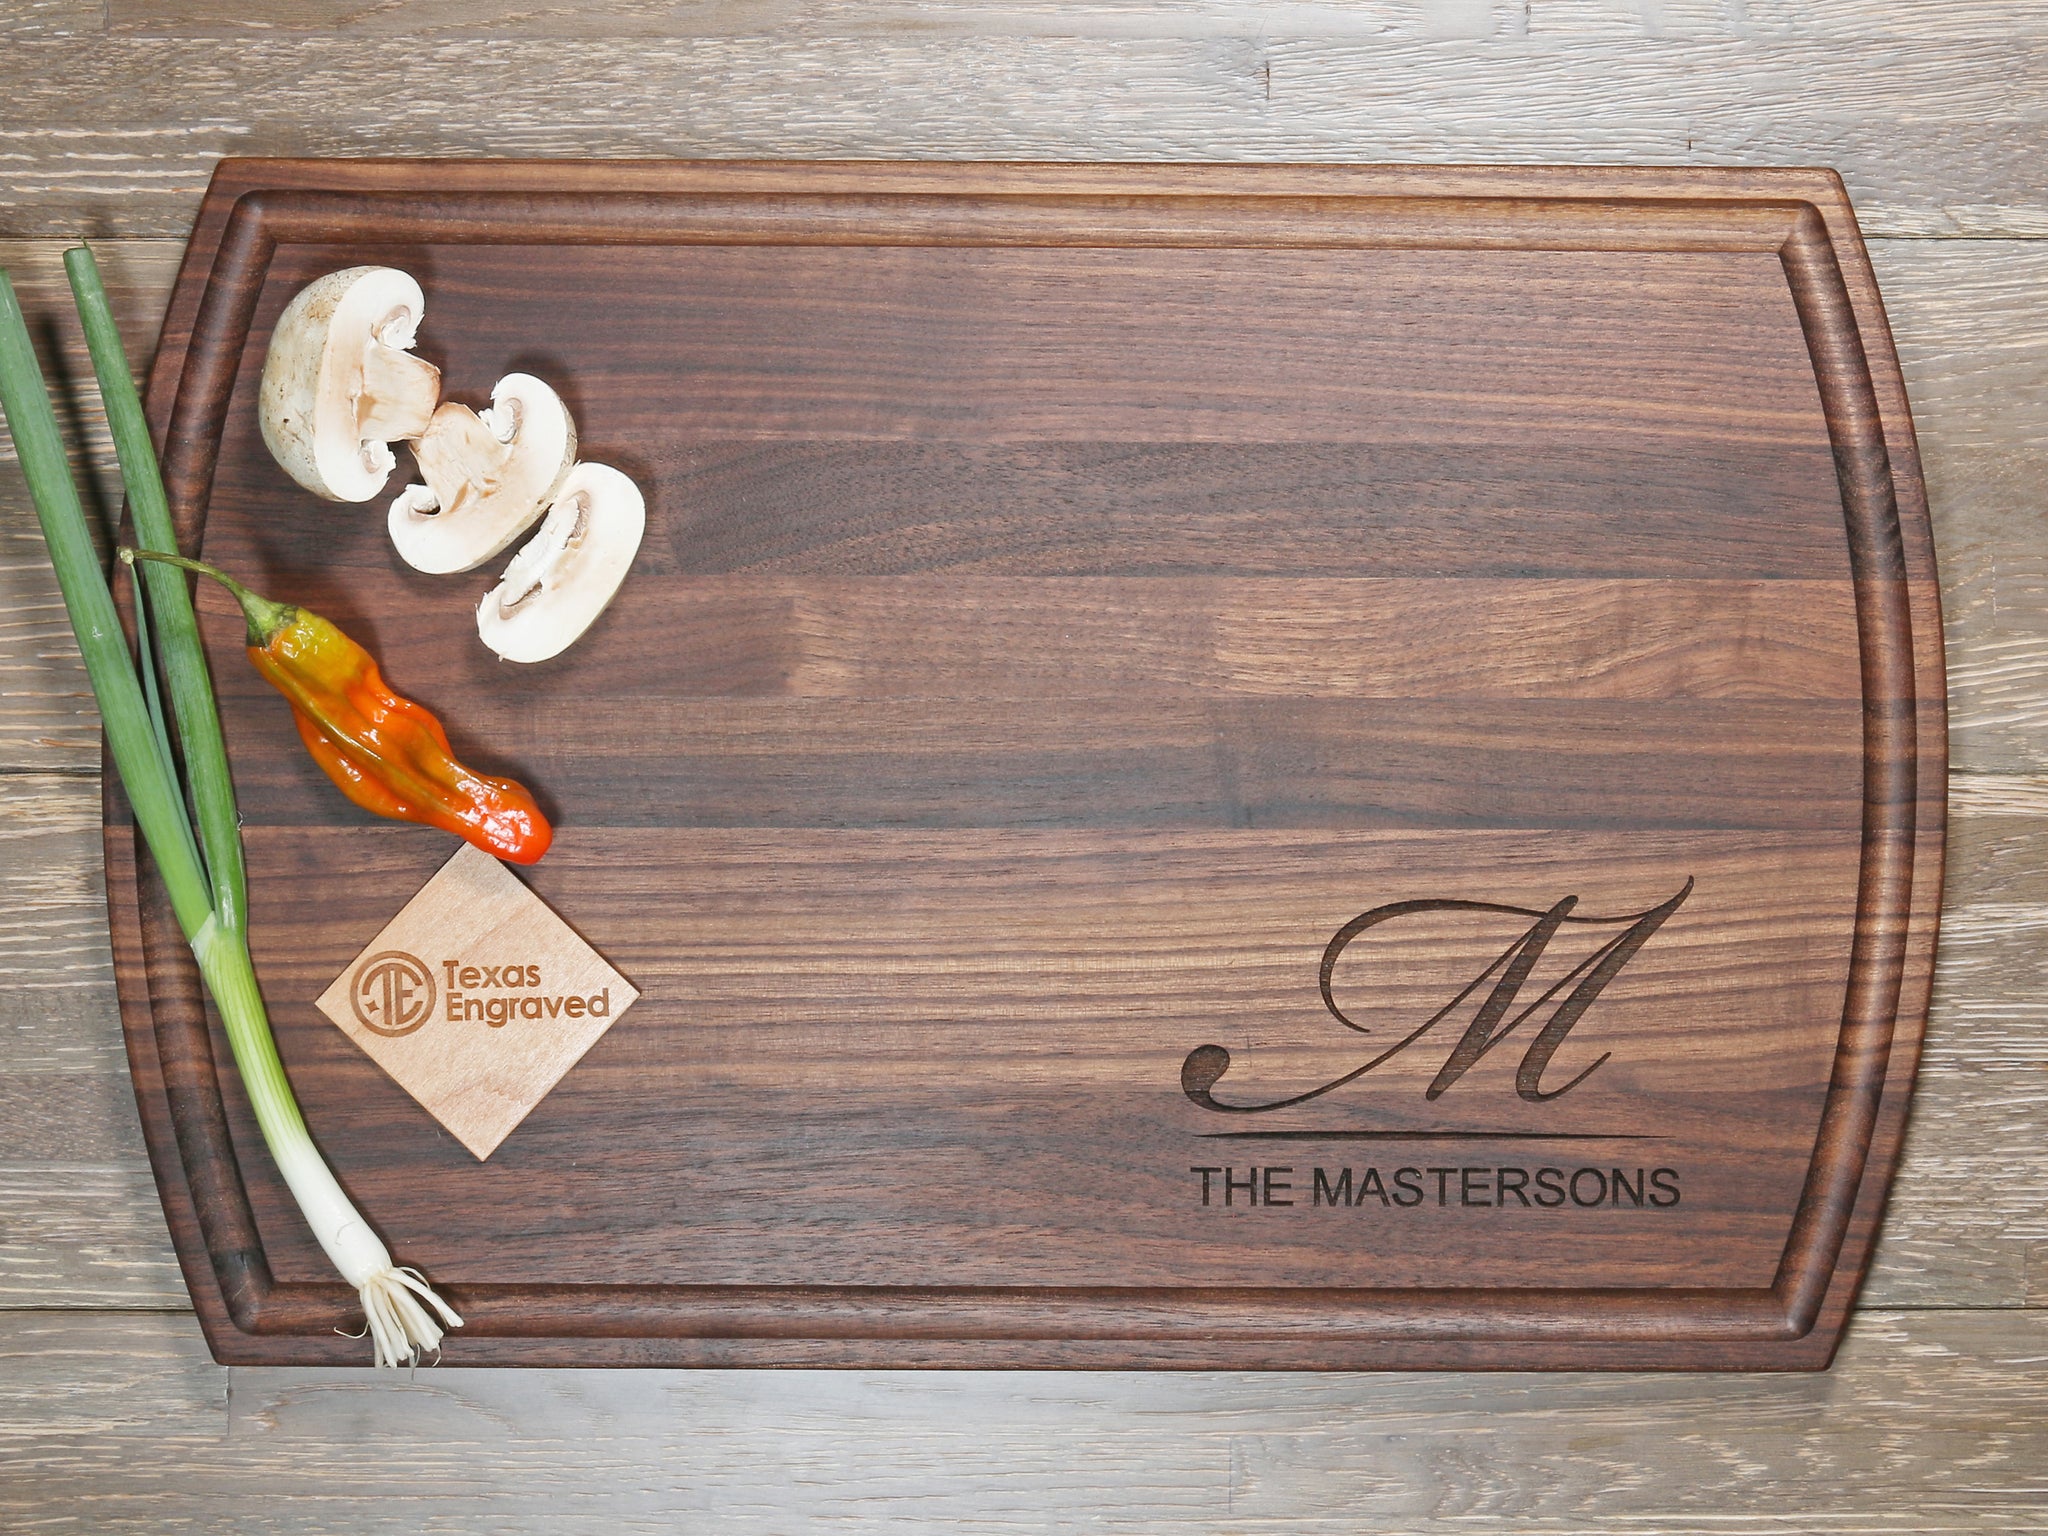 Personalized Wood Cutting Chopping Board Engraved and Monogrammed